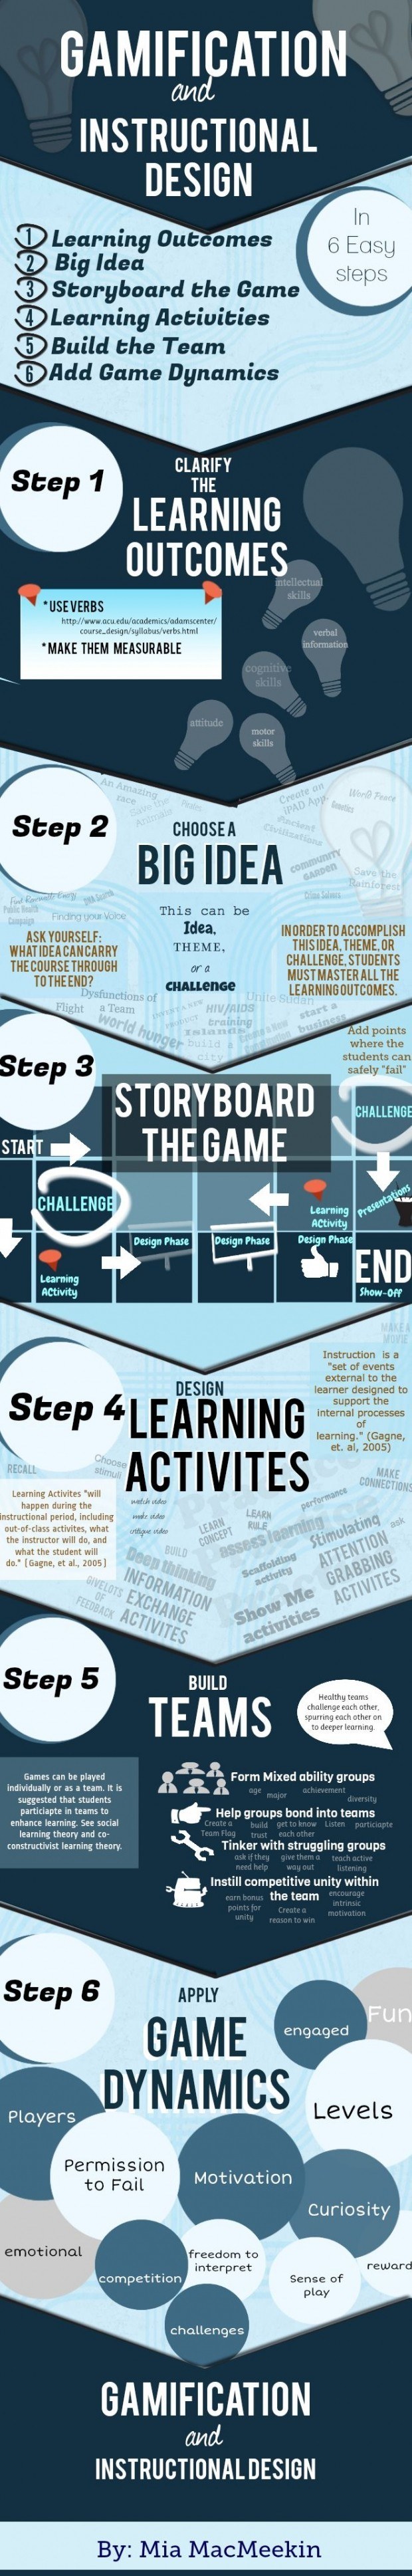 Gamification and Instructional Design Infographic thumbnail